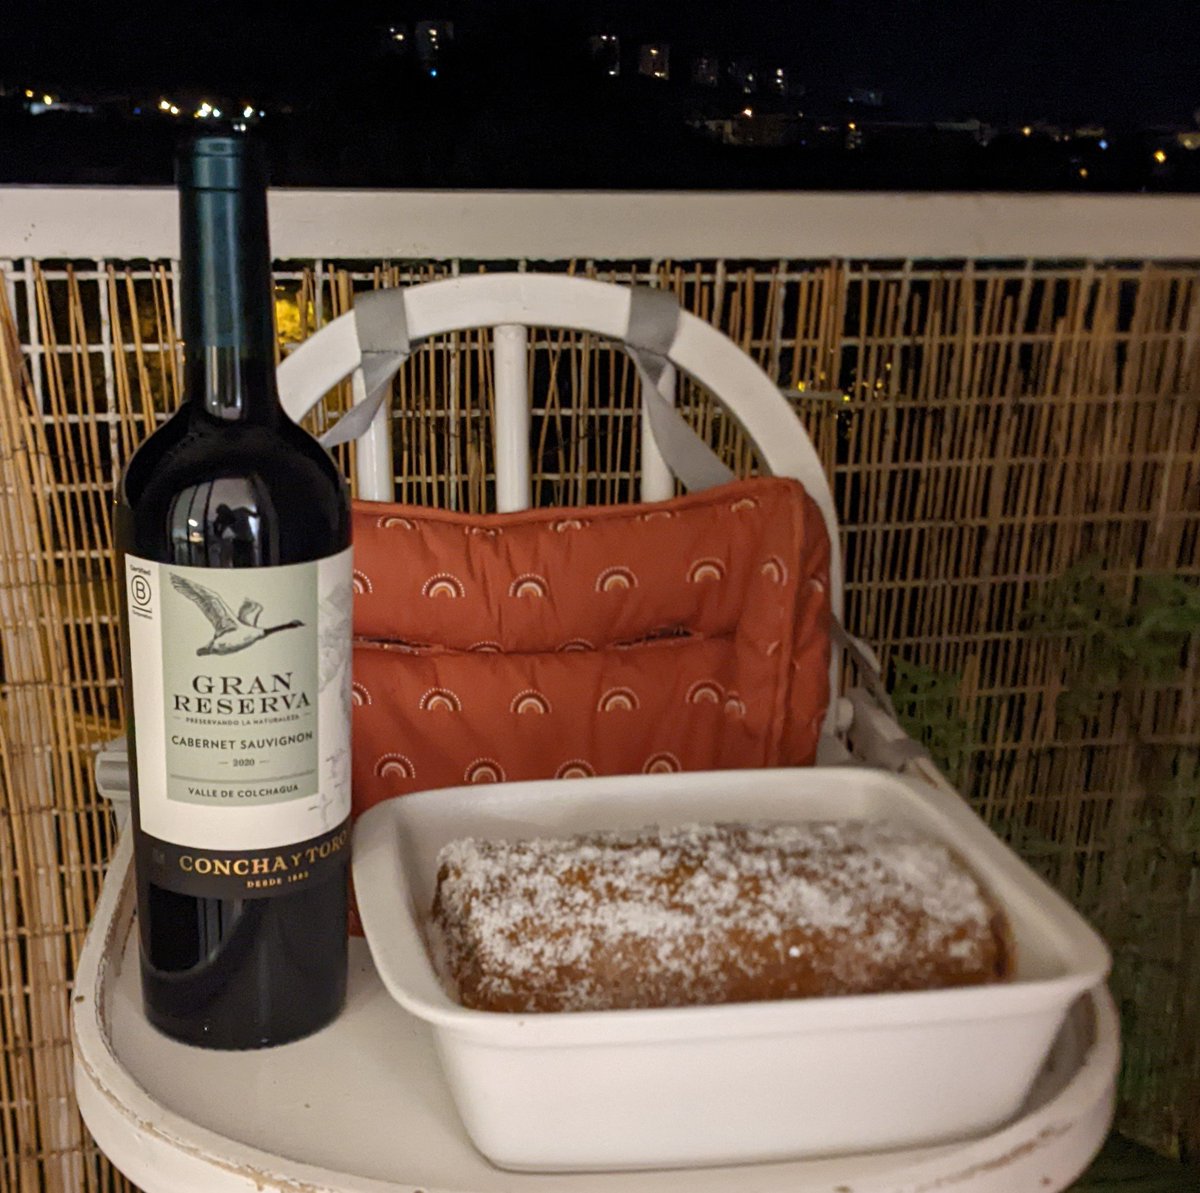 I just got a beautiful gift from 'the mom of the husband of (someone) that works with me in the lab'. A homemade cake with manjar and a great wine from Chile. Feeling so lucky to work with people that cross the ocean for a scientific adventure. @centuri_ls @CIML_Immunology